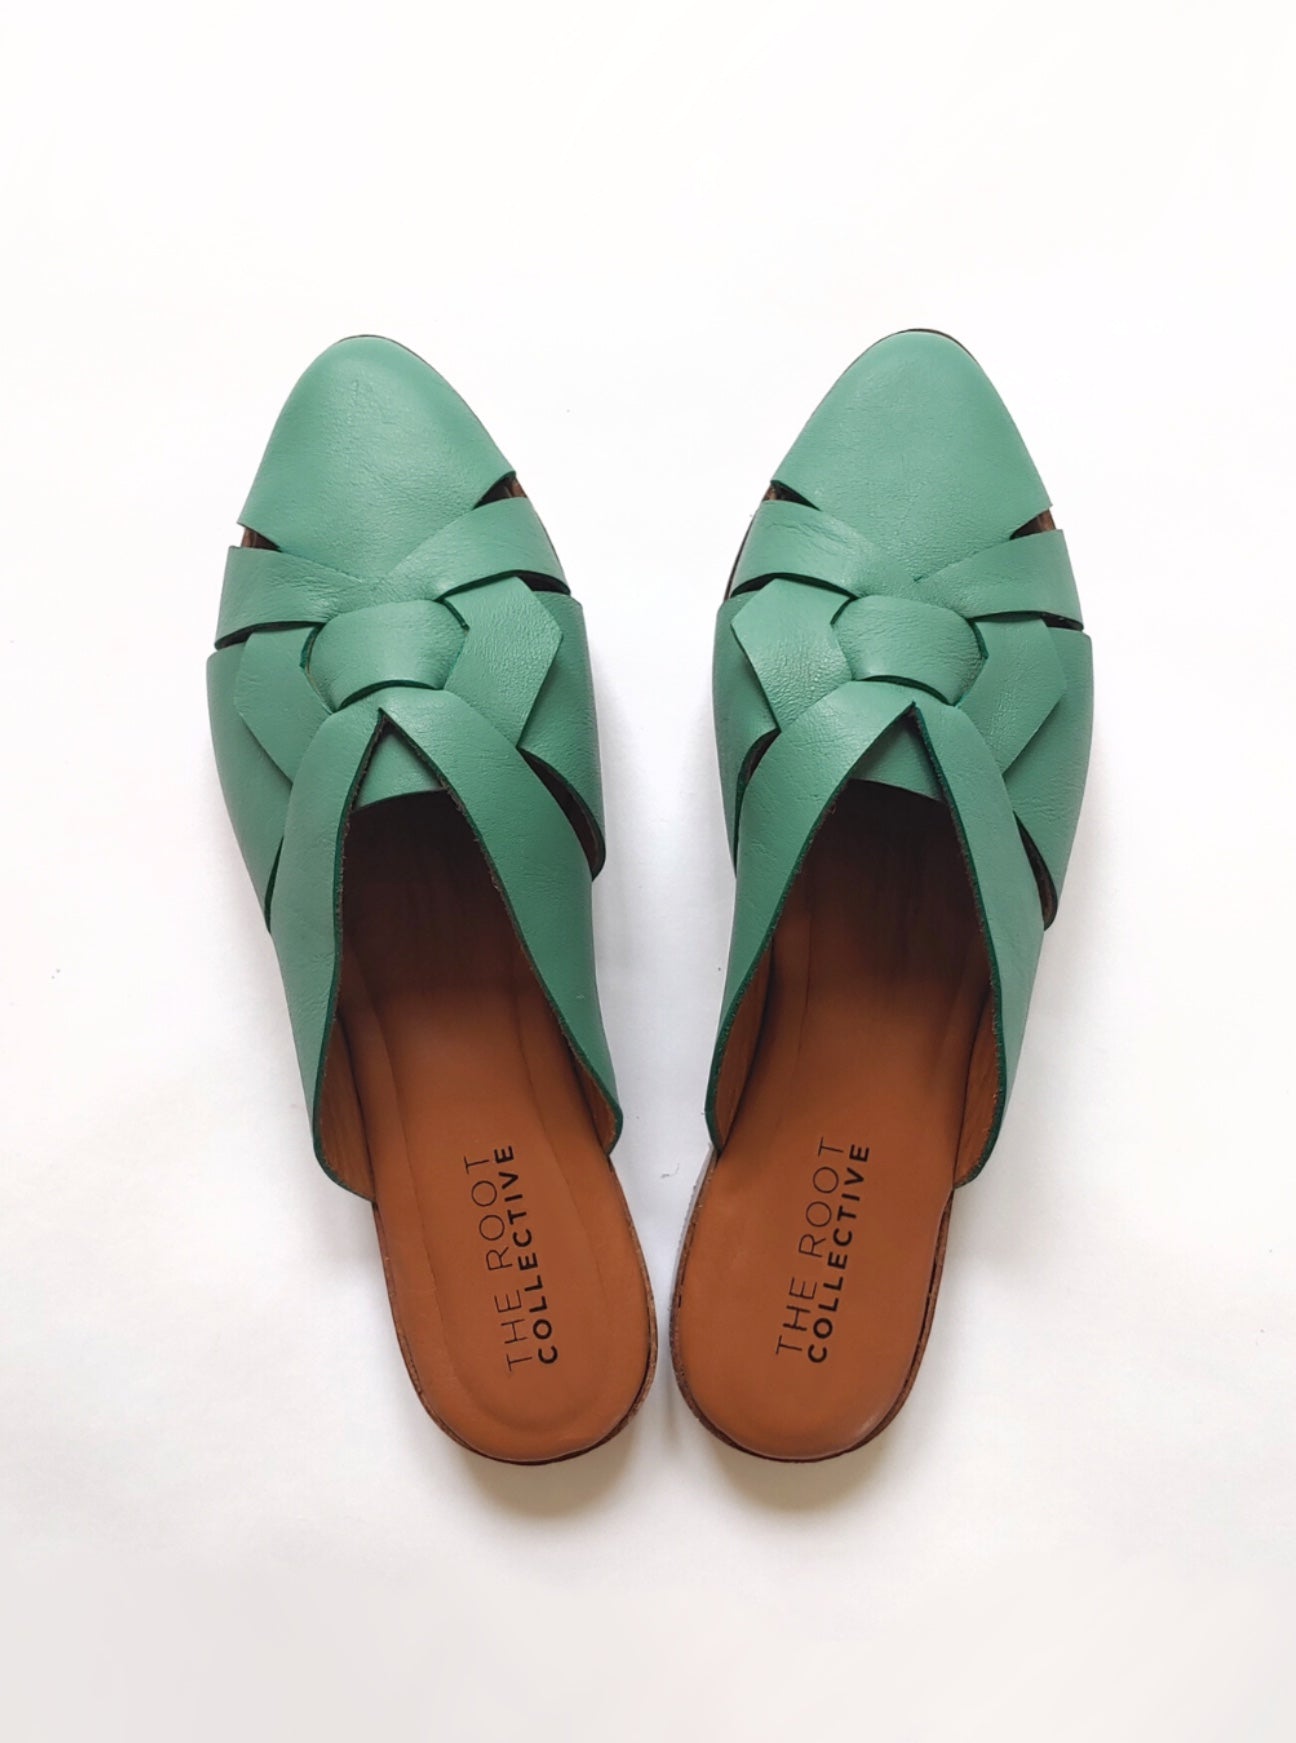 Holly Mule in Seafoam Leather (PREORDER)